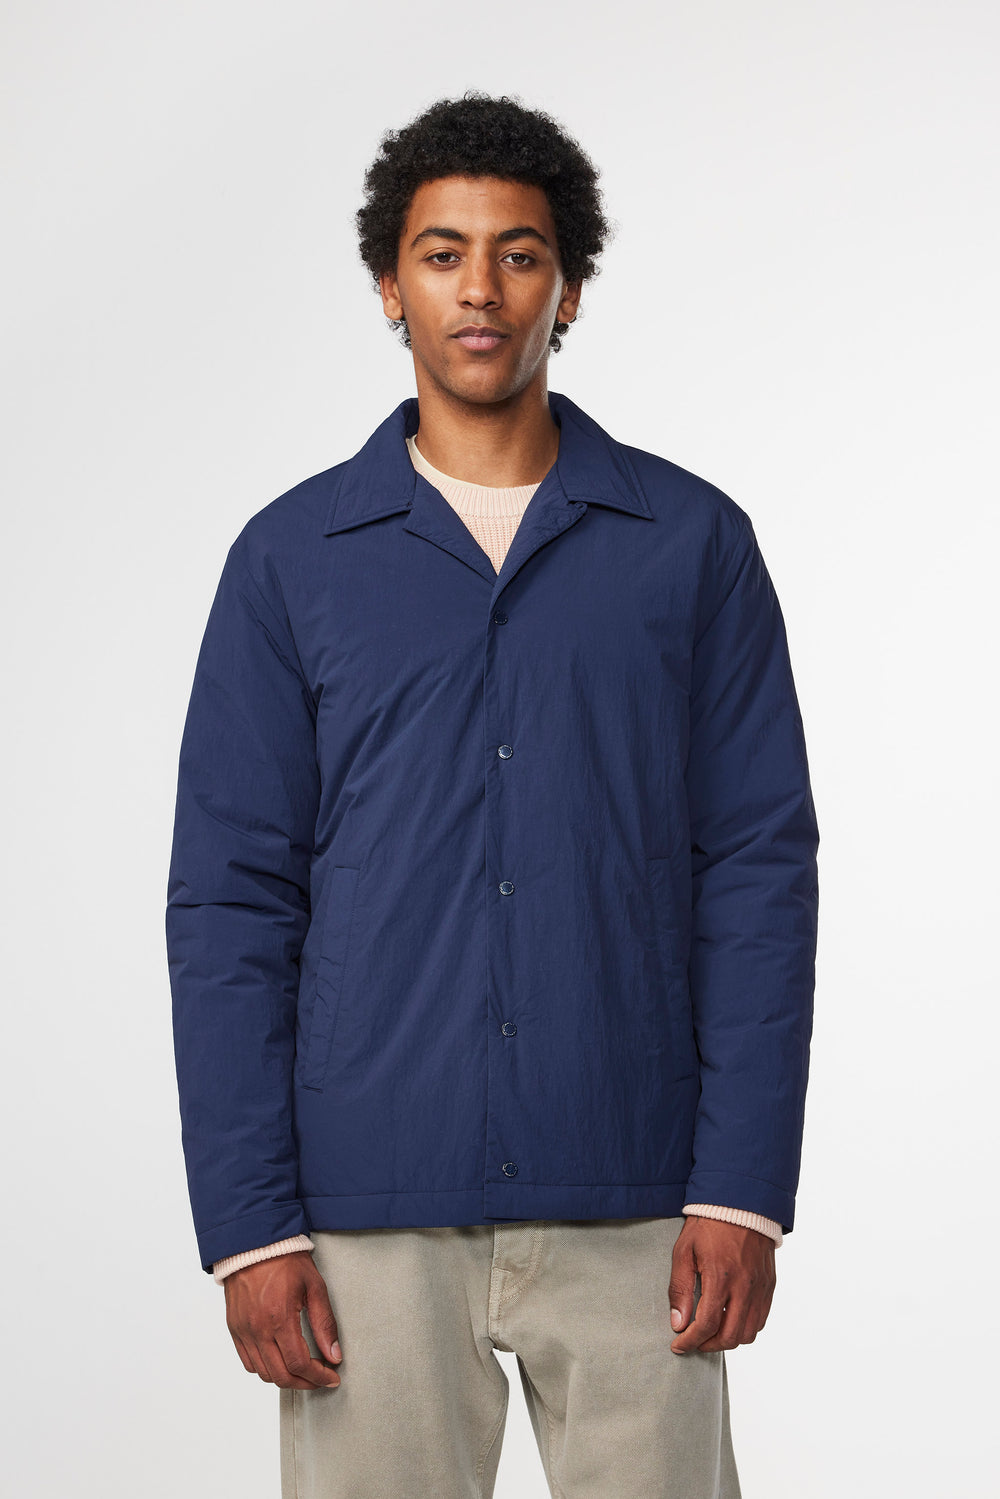 NN07 Matteo 8280 Padded Jacket in Navy Blue | Buster McGee